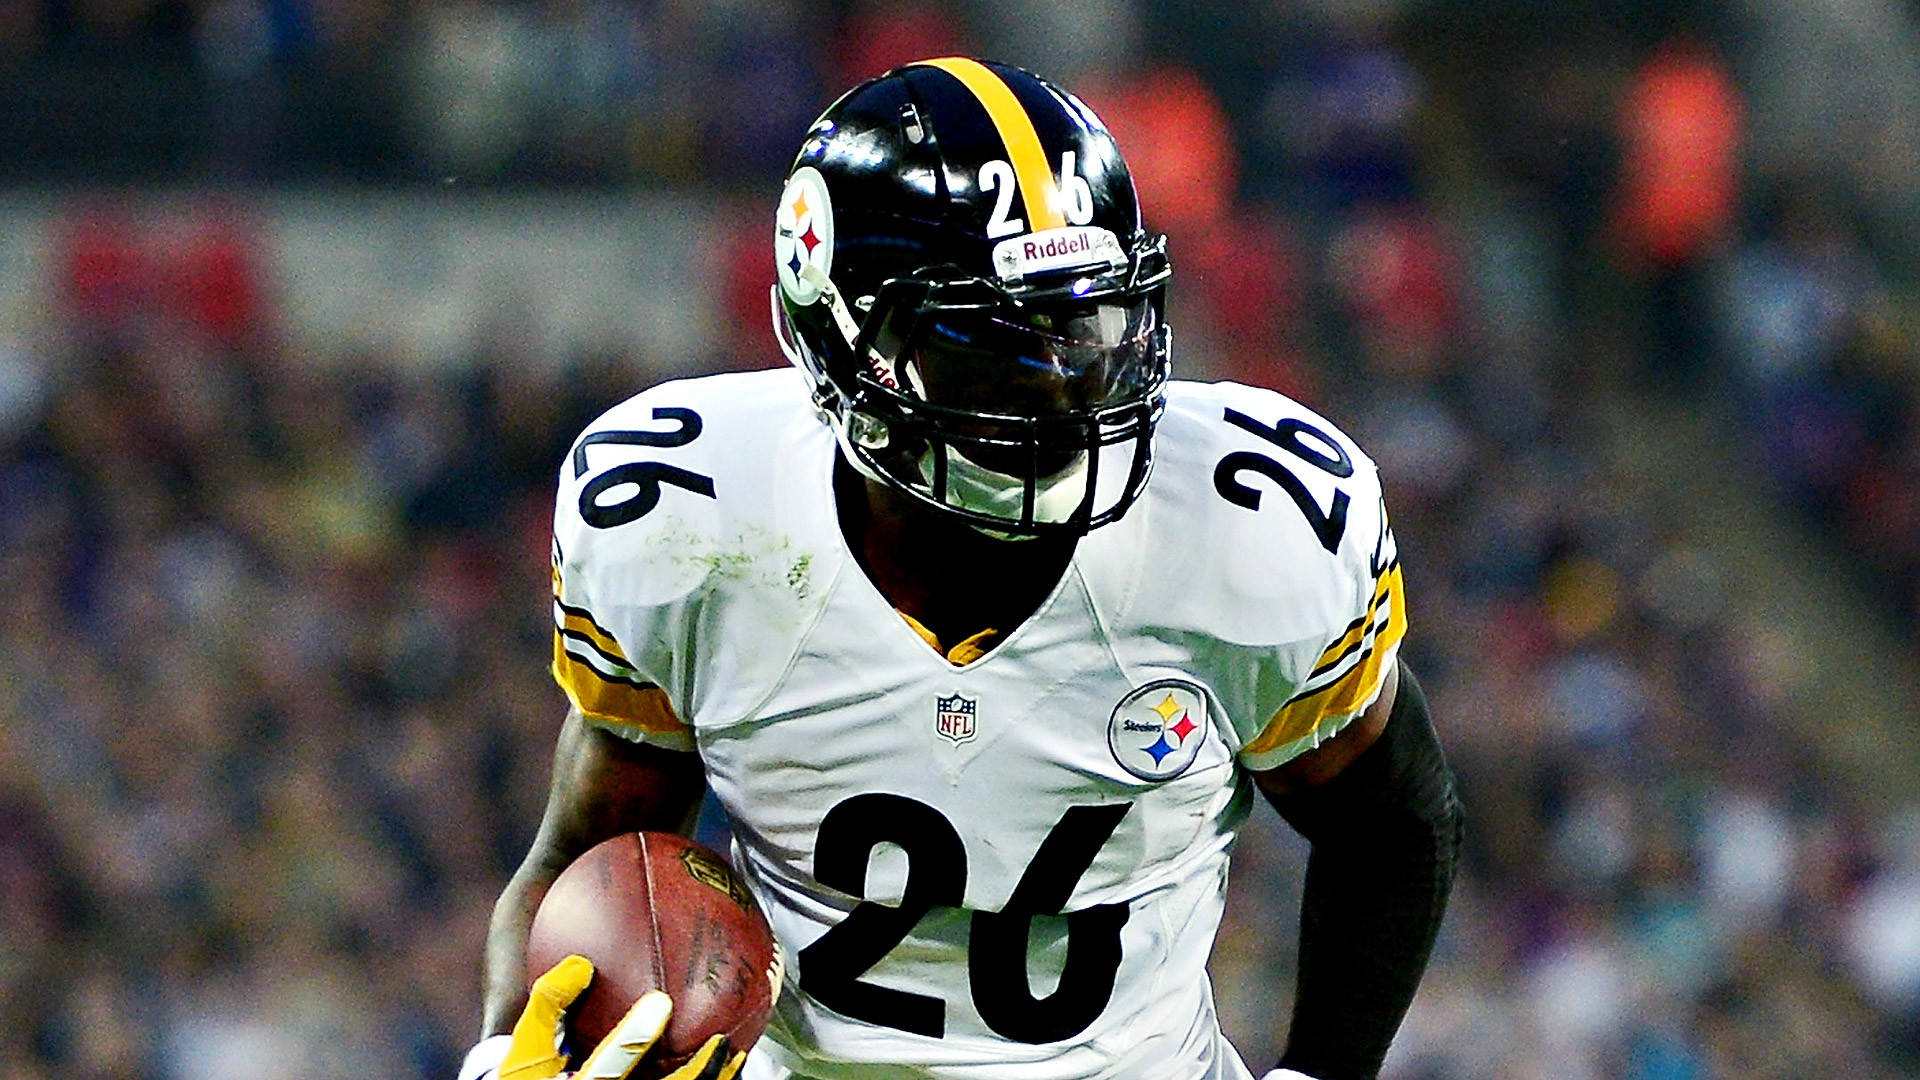 LeVeon Bell likely to be suspended for first two games This Given Sunday